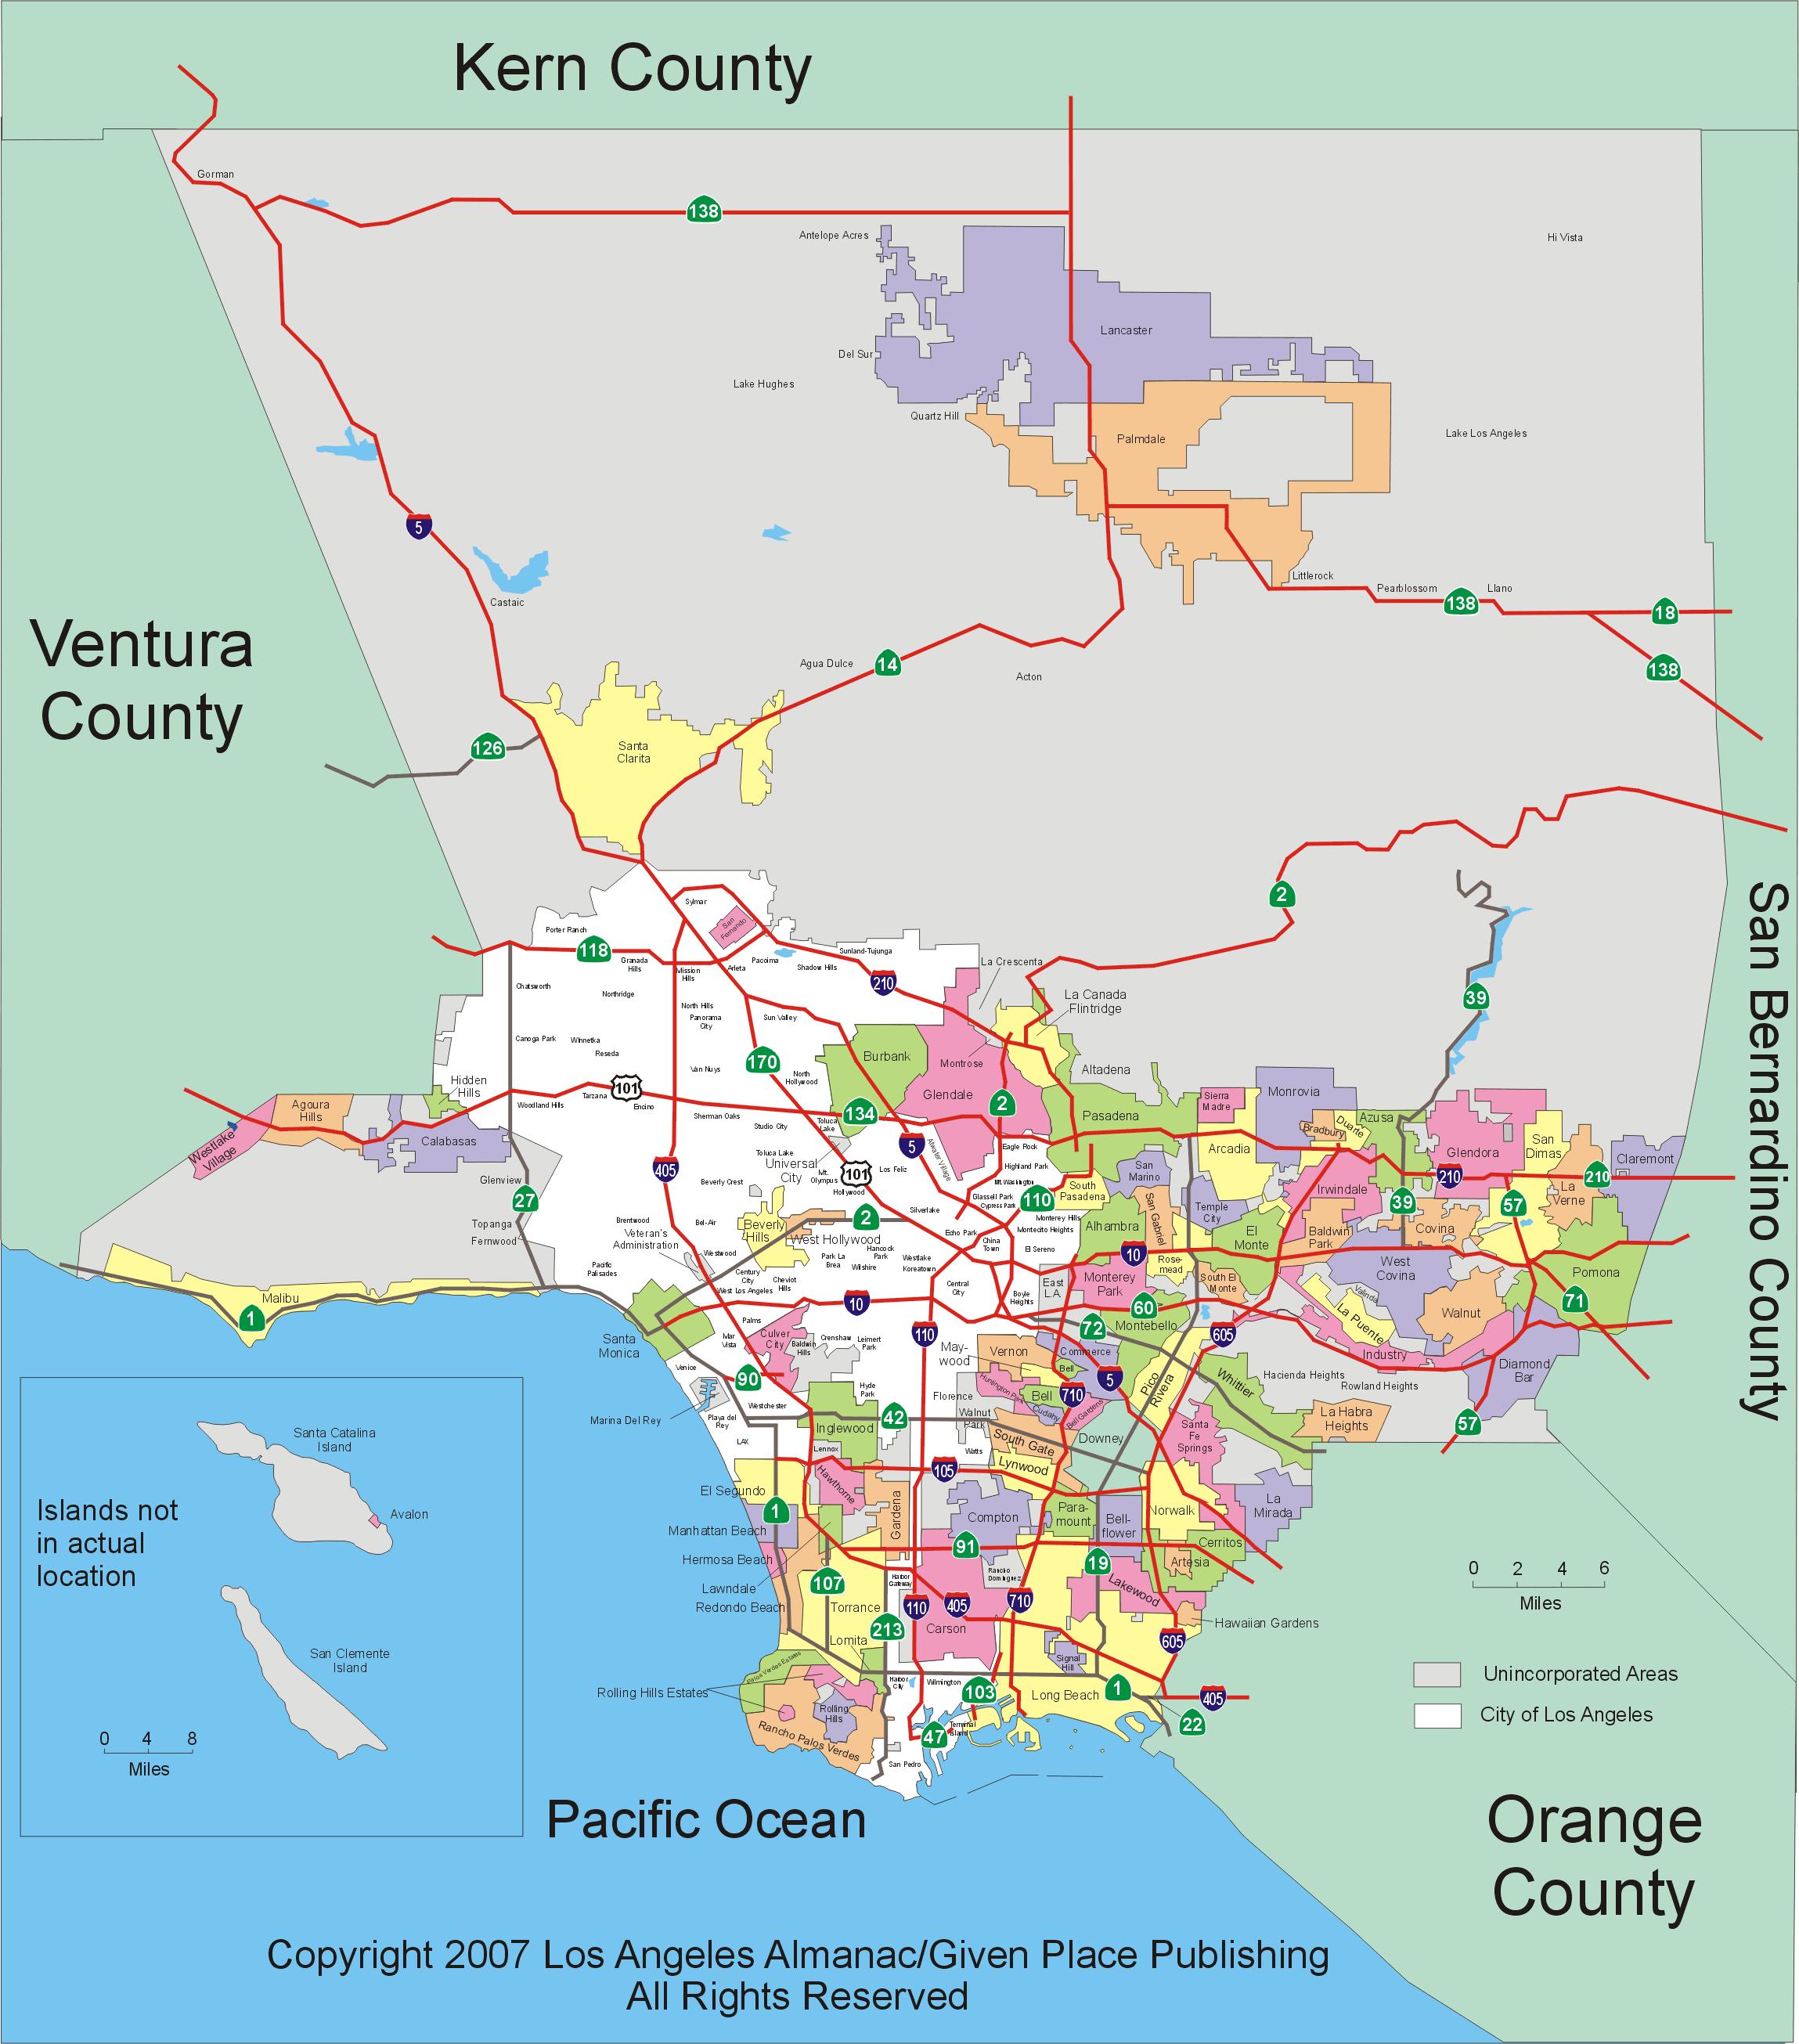 Los Angeles County Gis Map Los Angeles gis map   Los Angeles county gis map (California   USA)